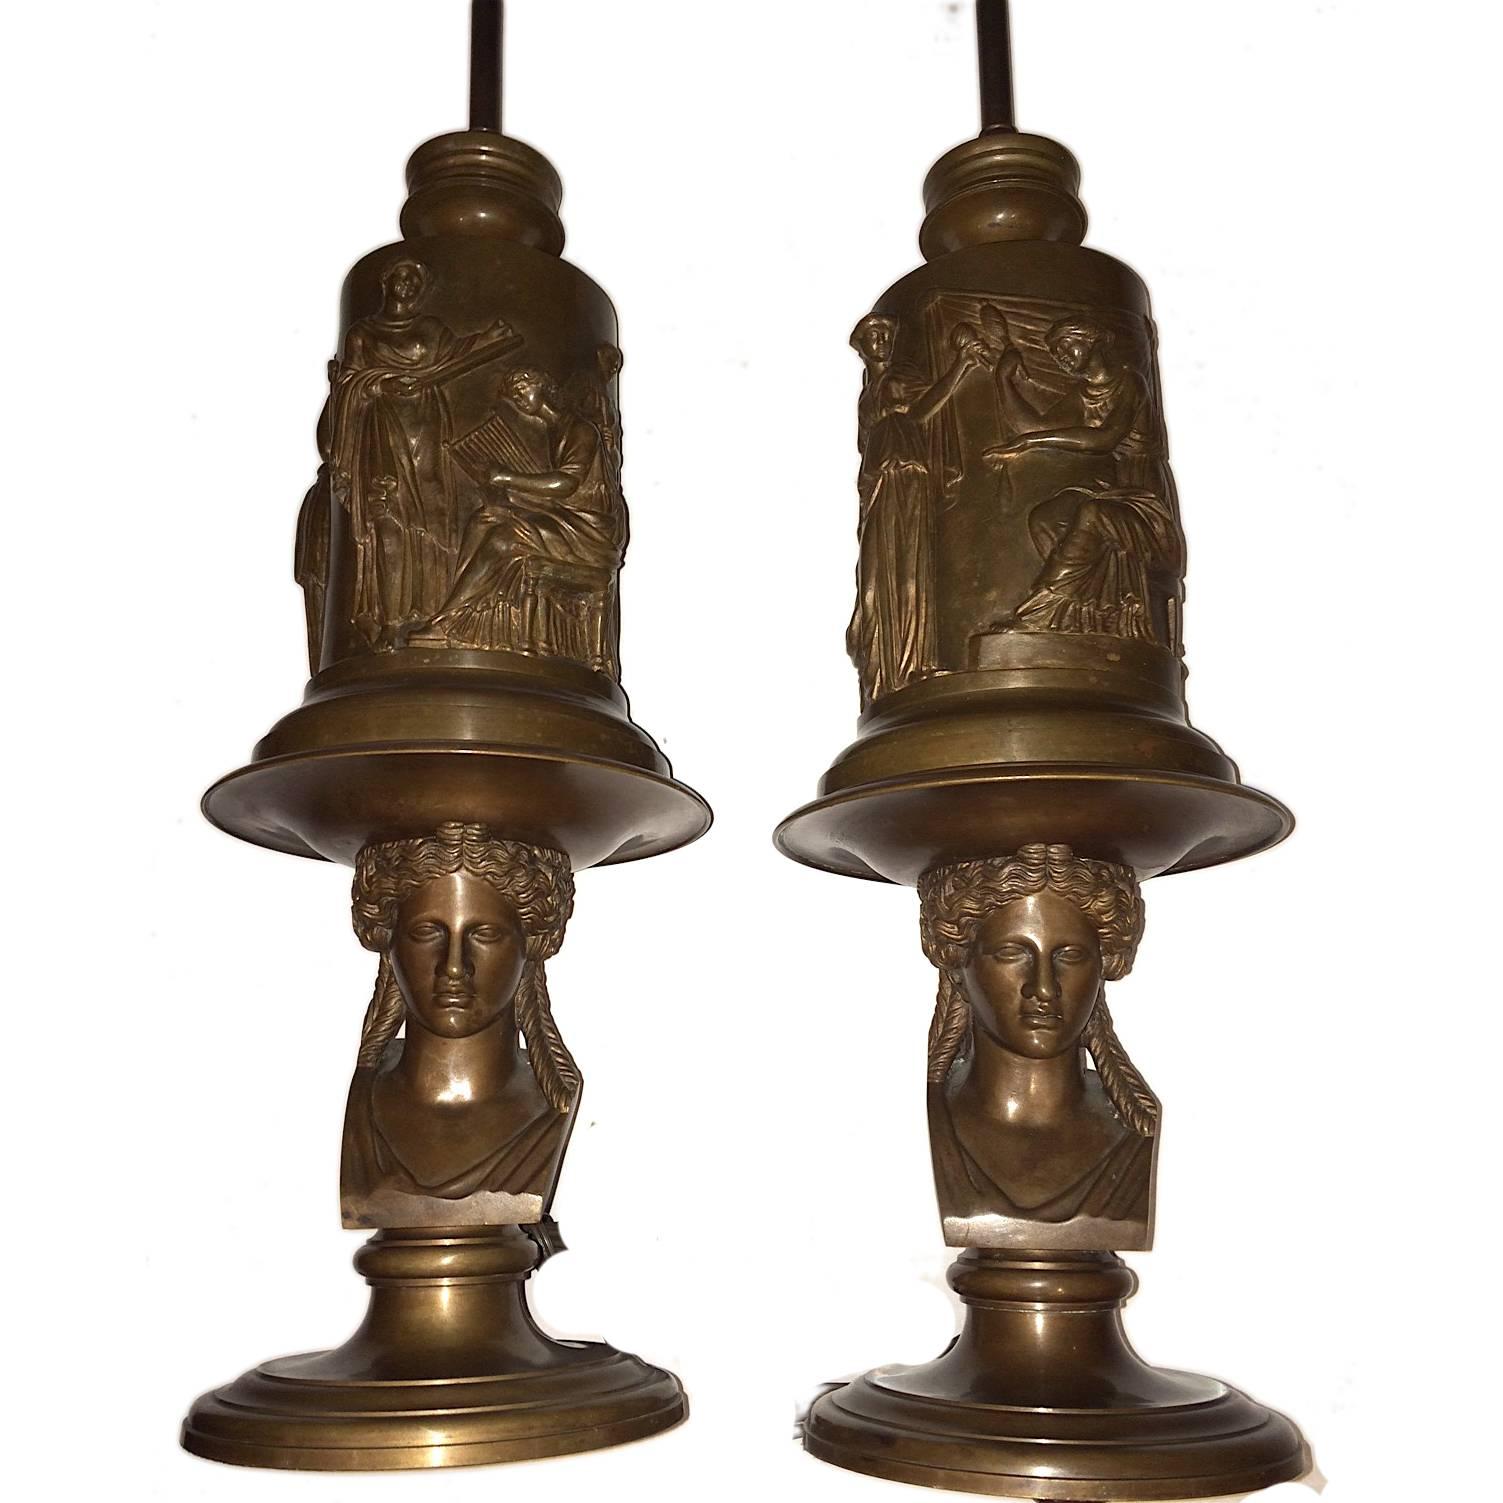 Important Barbedienne Table Lamps For Sale